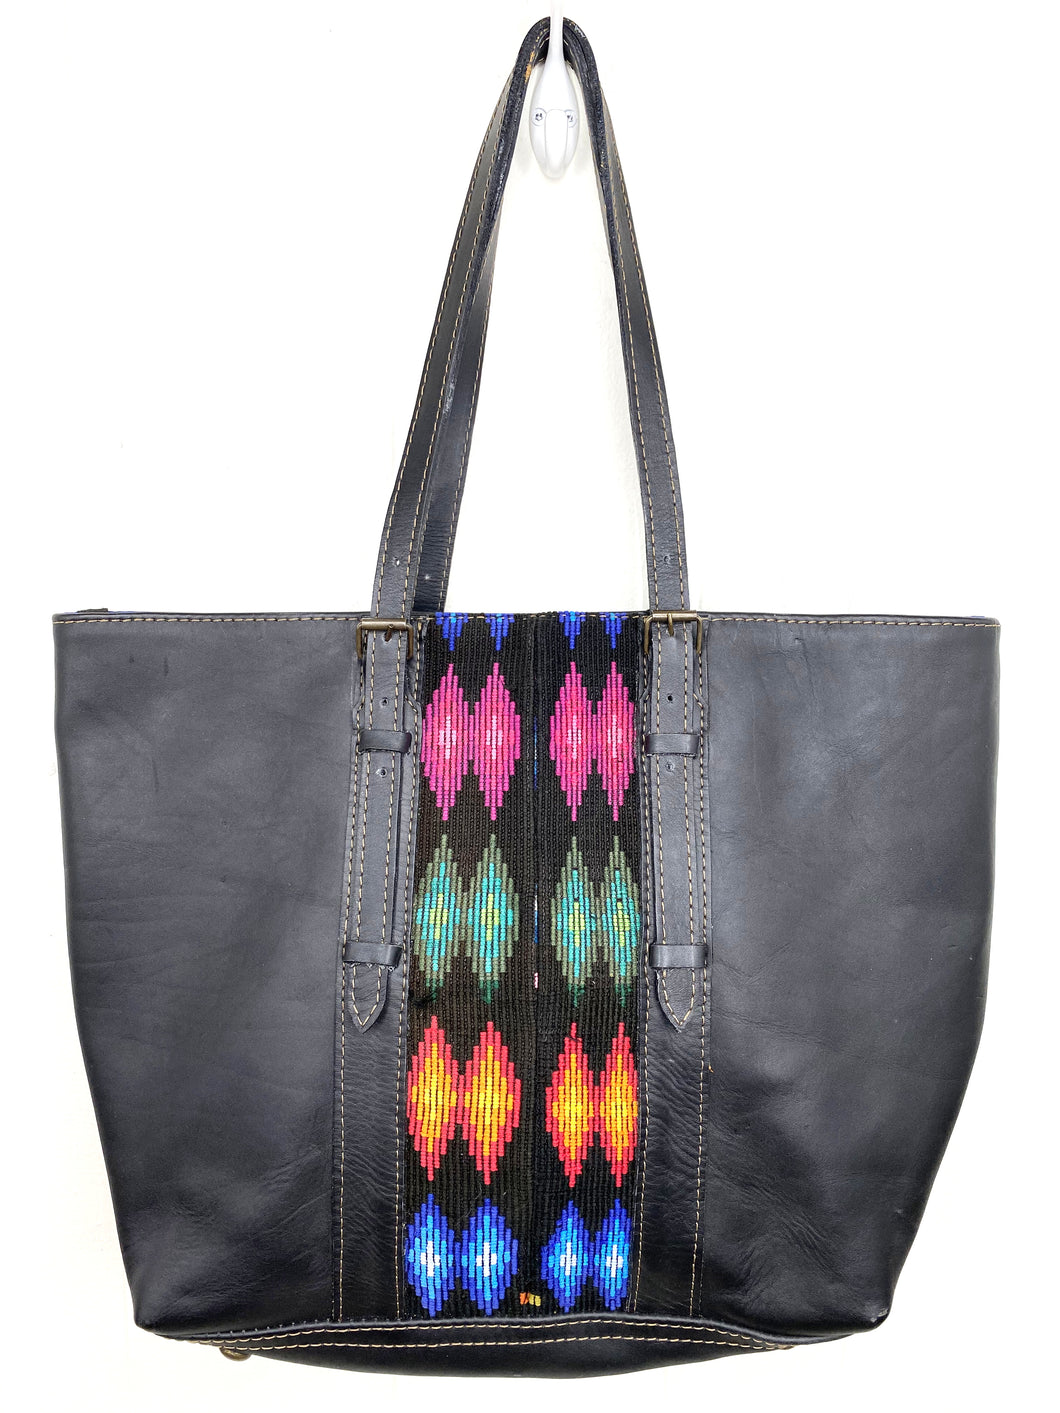 MoonLake Designs handmade unique Isabella Large Everyday Tote in Black Leather with multi-color handwoven huipil design and rich blue cotton interior lining